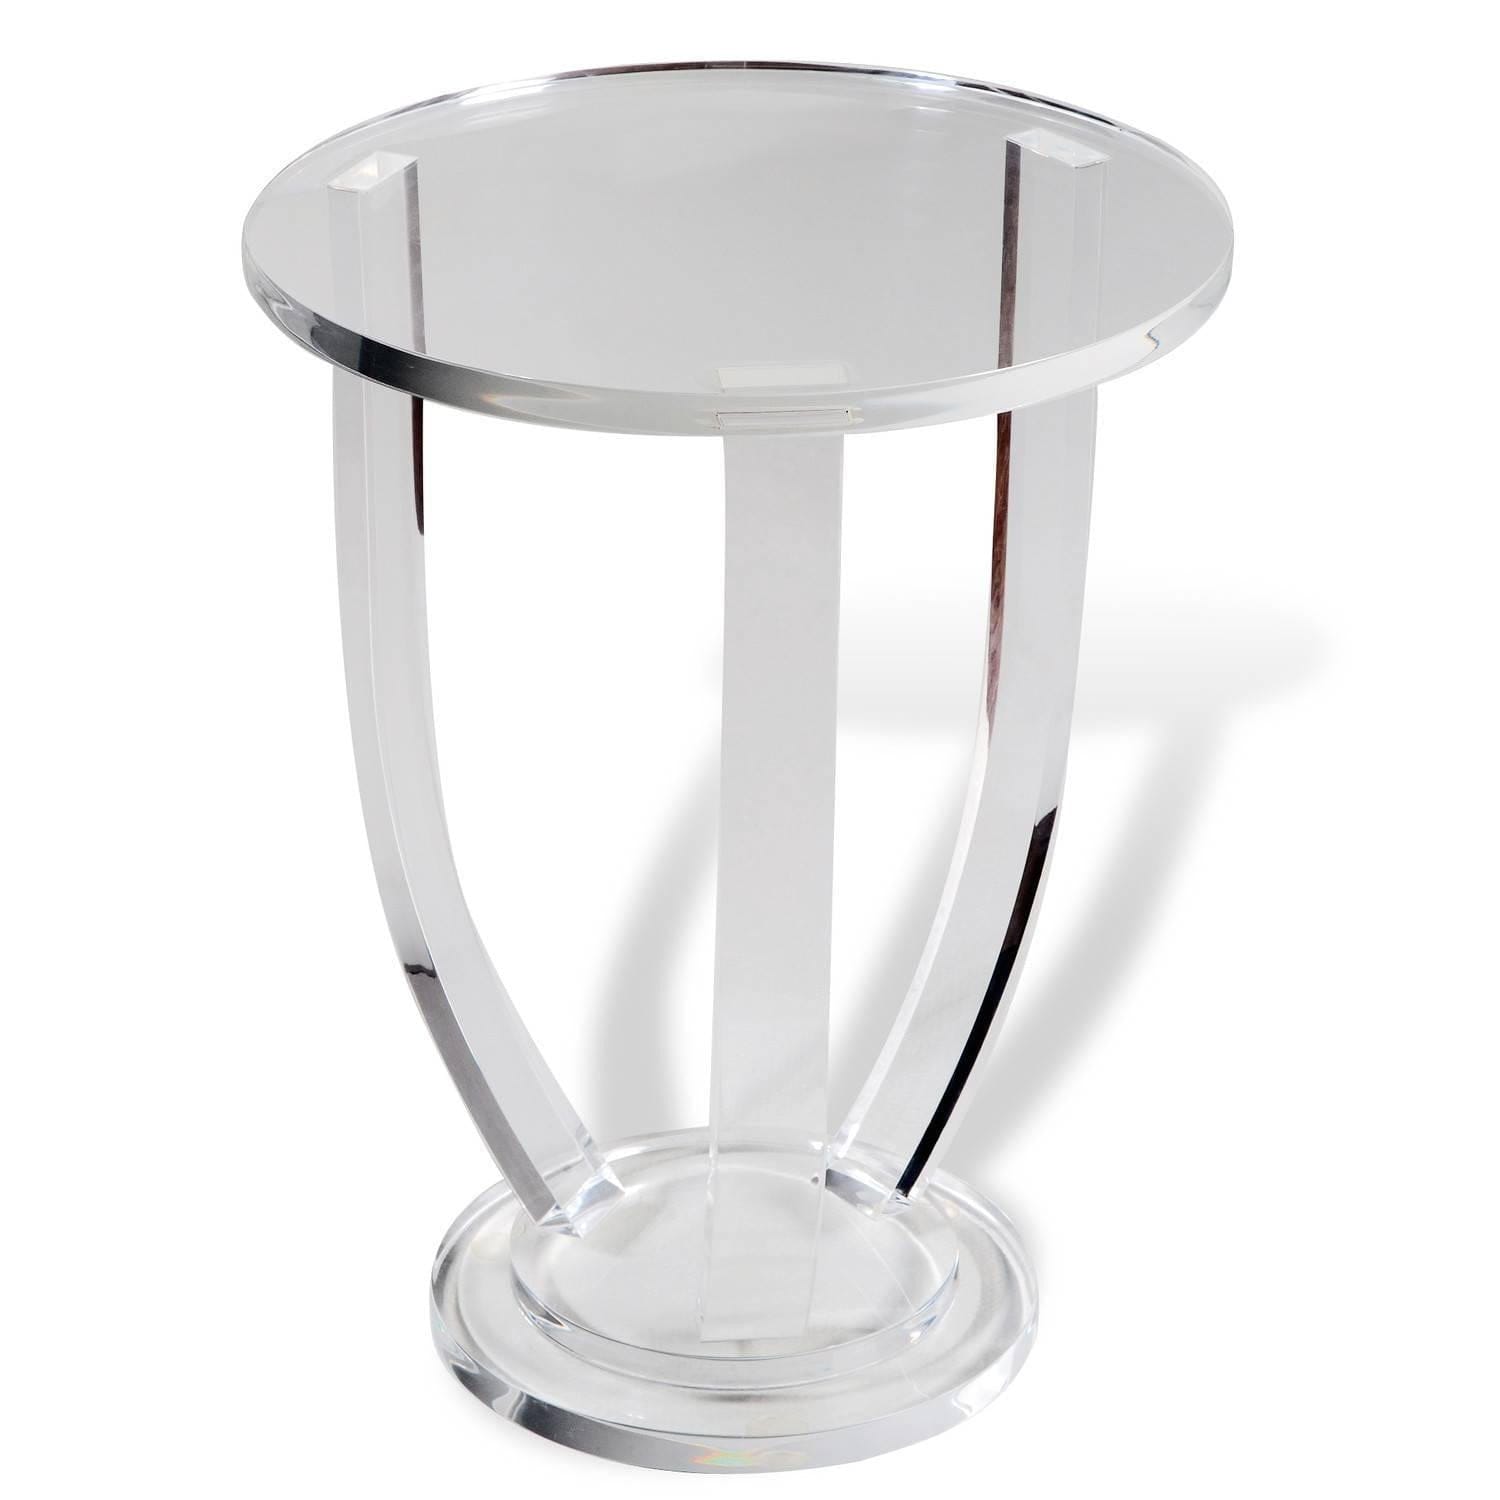 Round Acrylic Side Table English Country Home